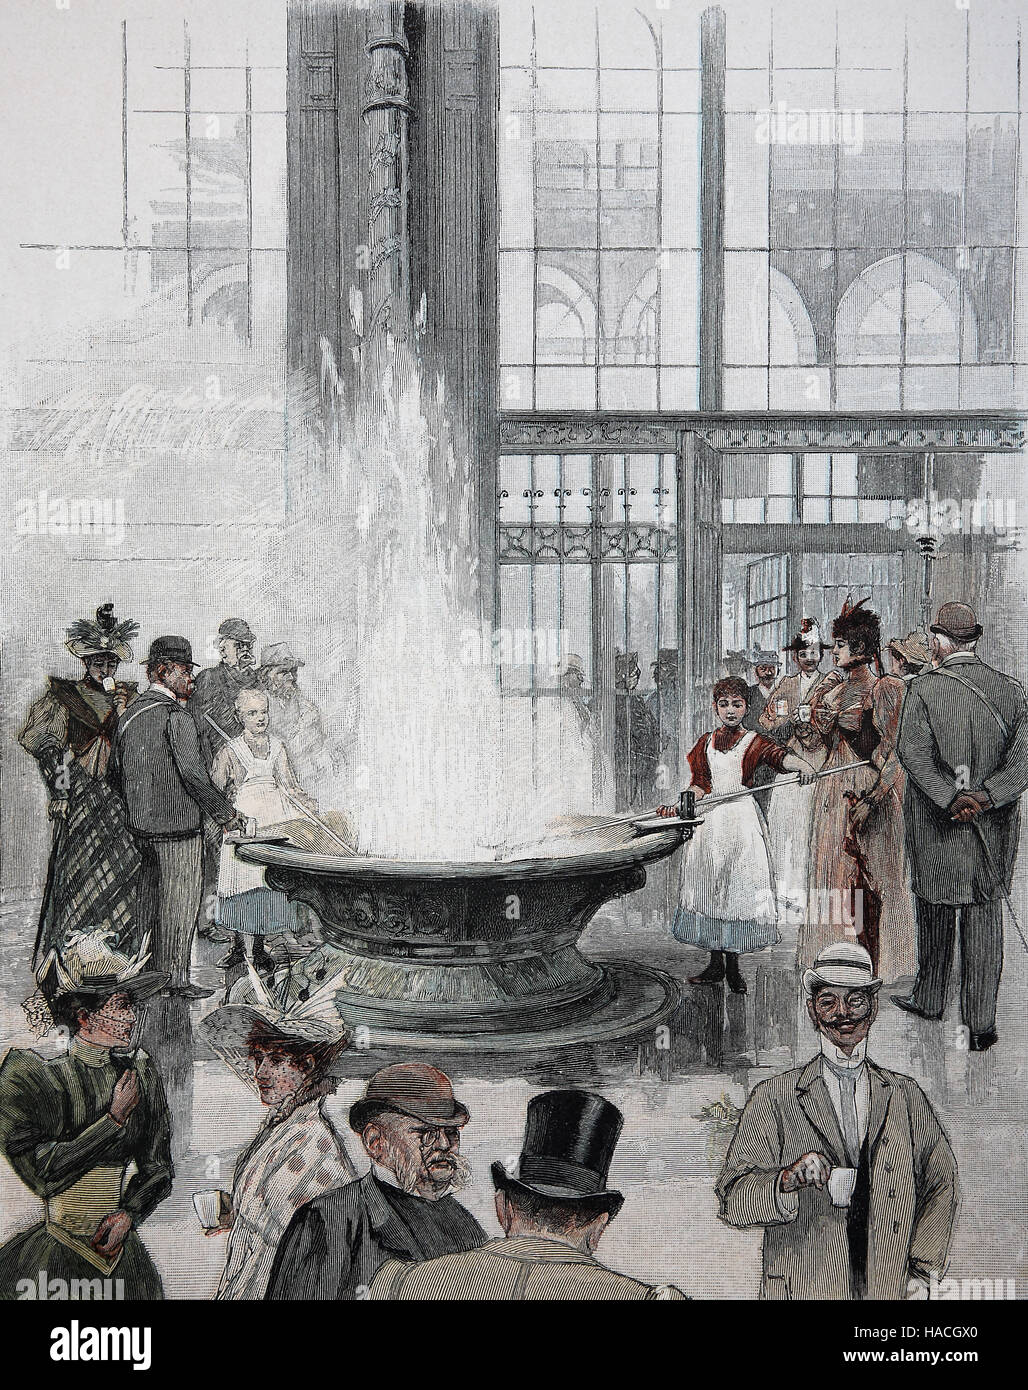 Karlovy Vary or Carlsbad, Karlsbad, is a spa town situated in western Bohemia, Czech Republic, here a geyser, 1880, historic illustration, woodcut Stock Photo